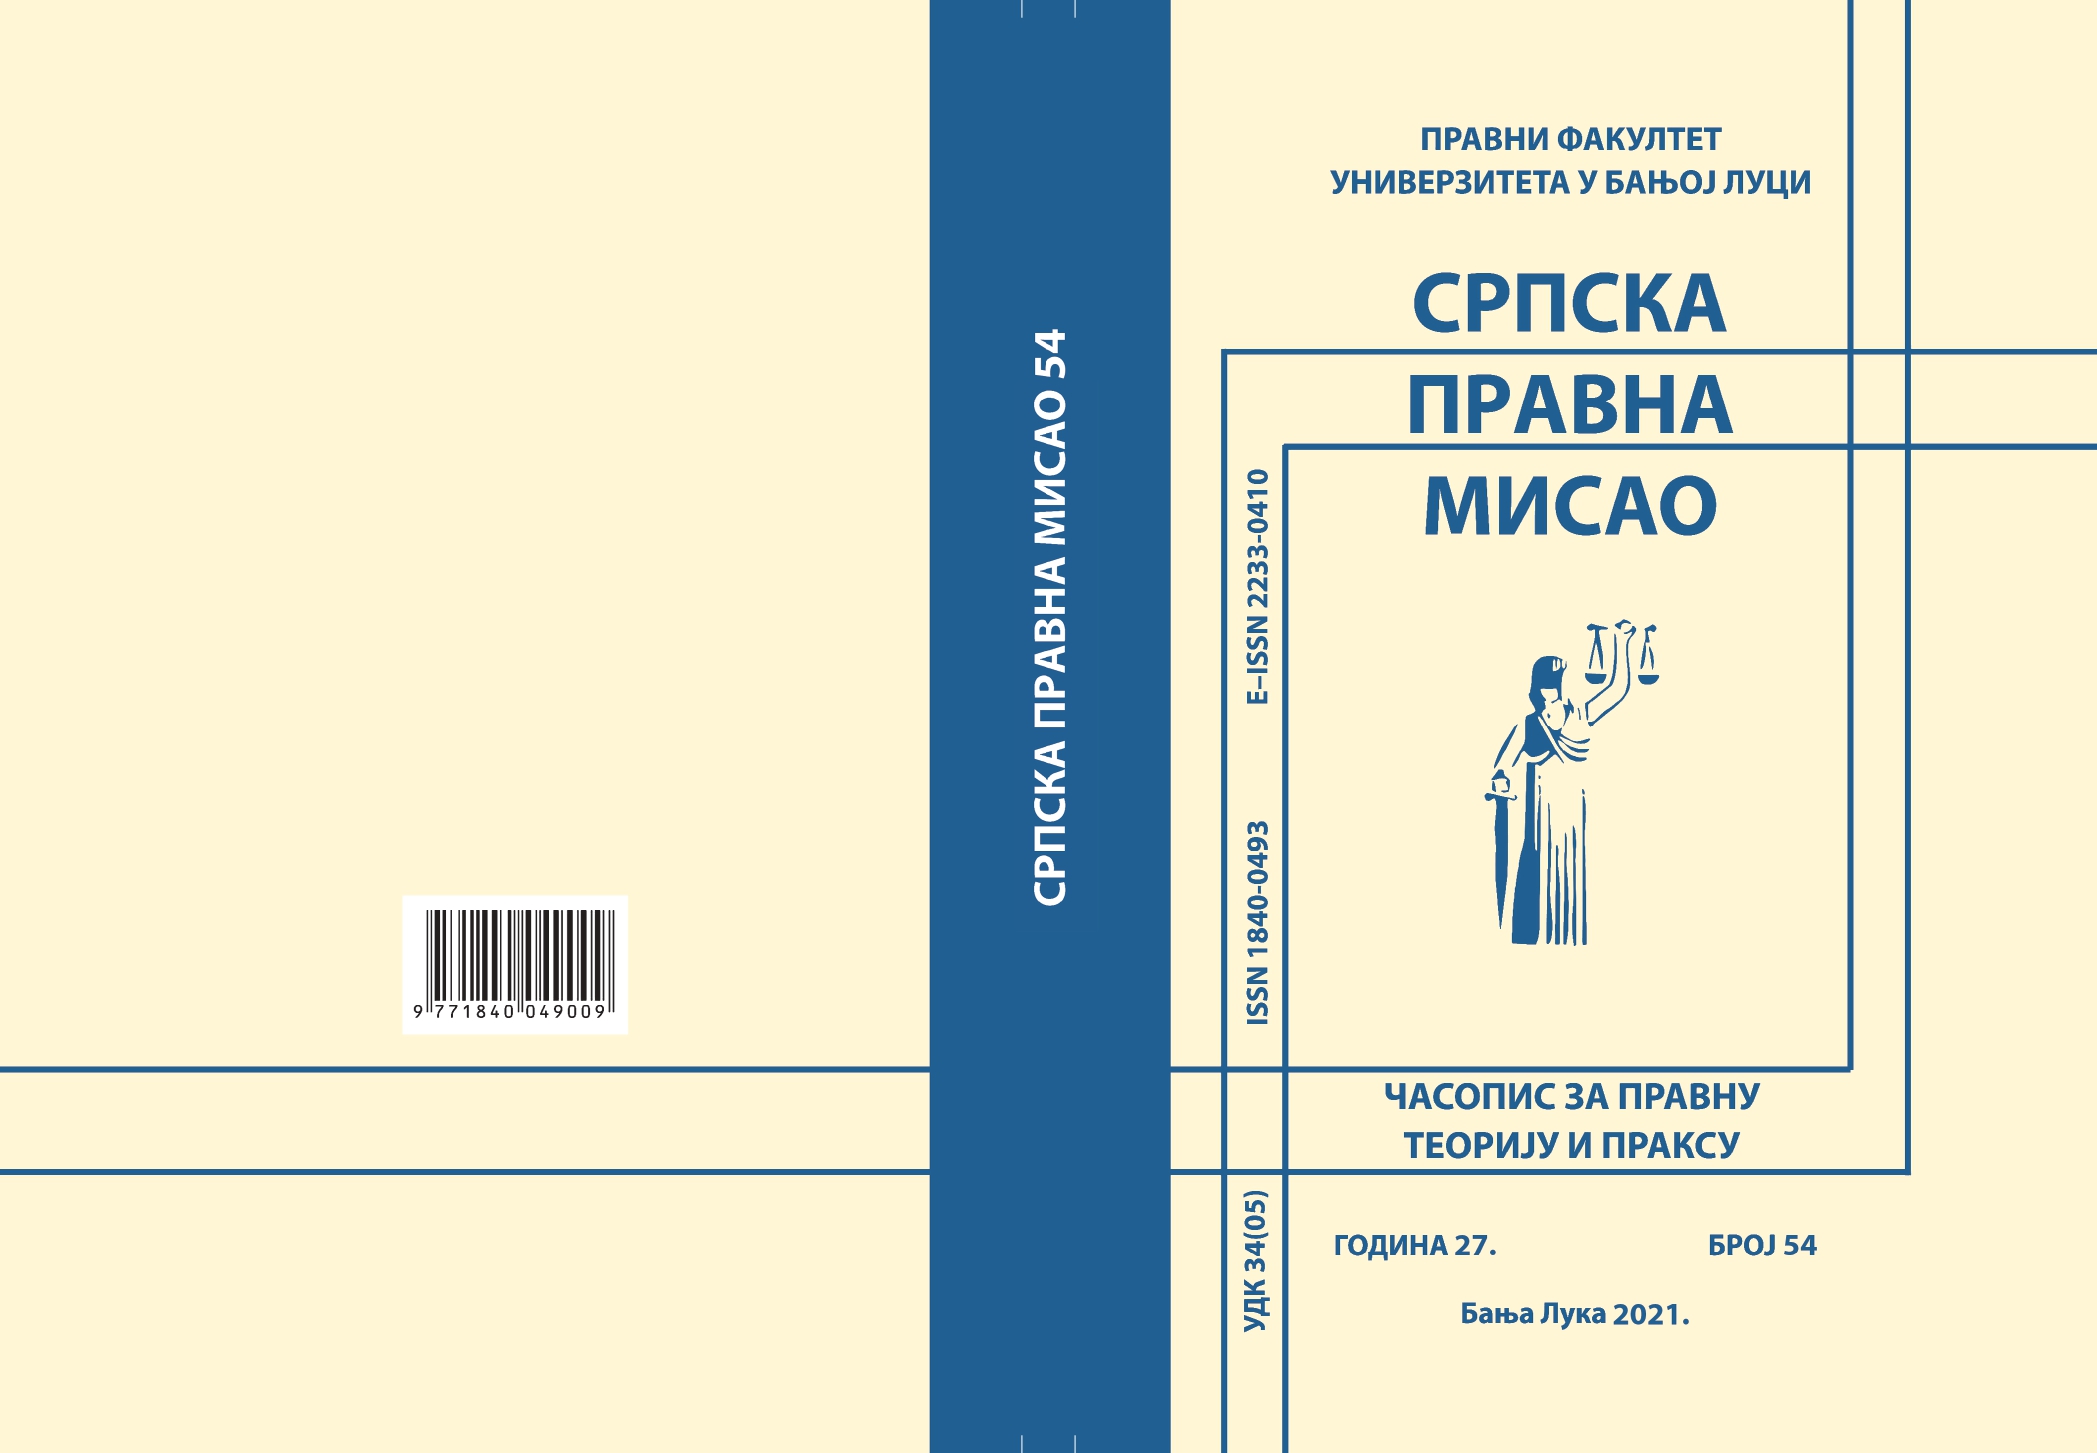 PRACTICE OF THE CONSTITUTIONAL COURT OF THE REPUBLIC OF SERBIA Cover Image